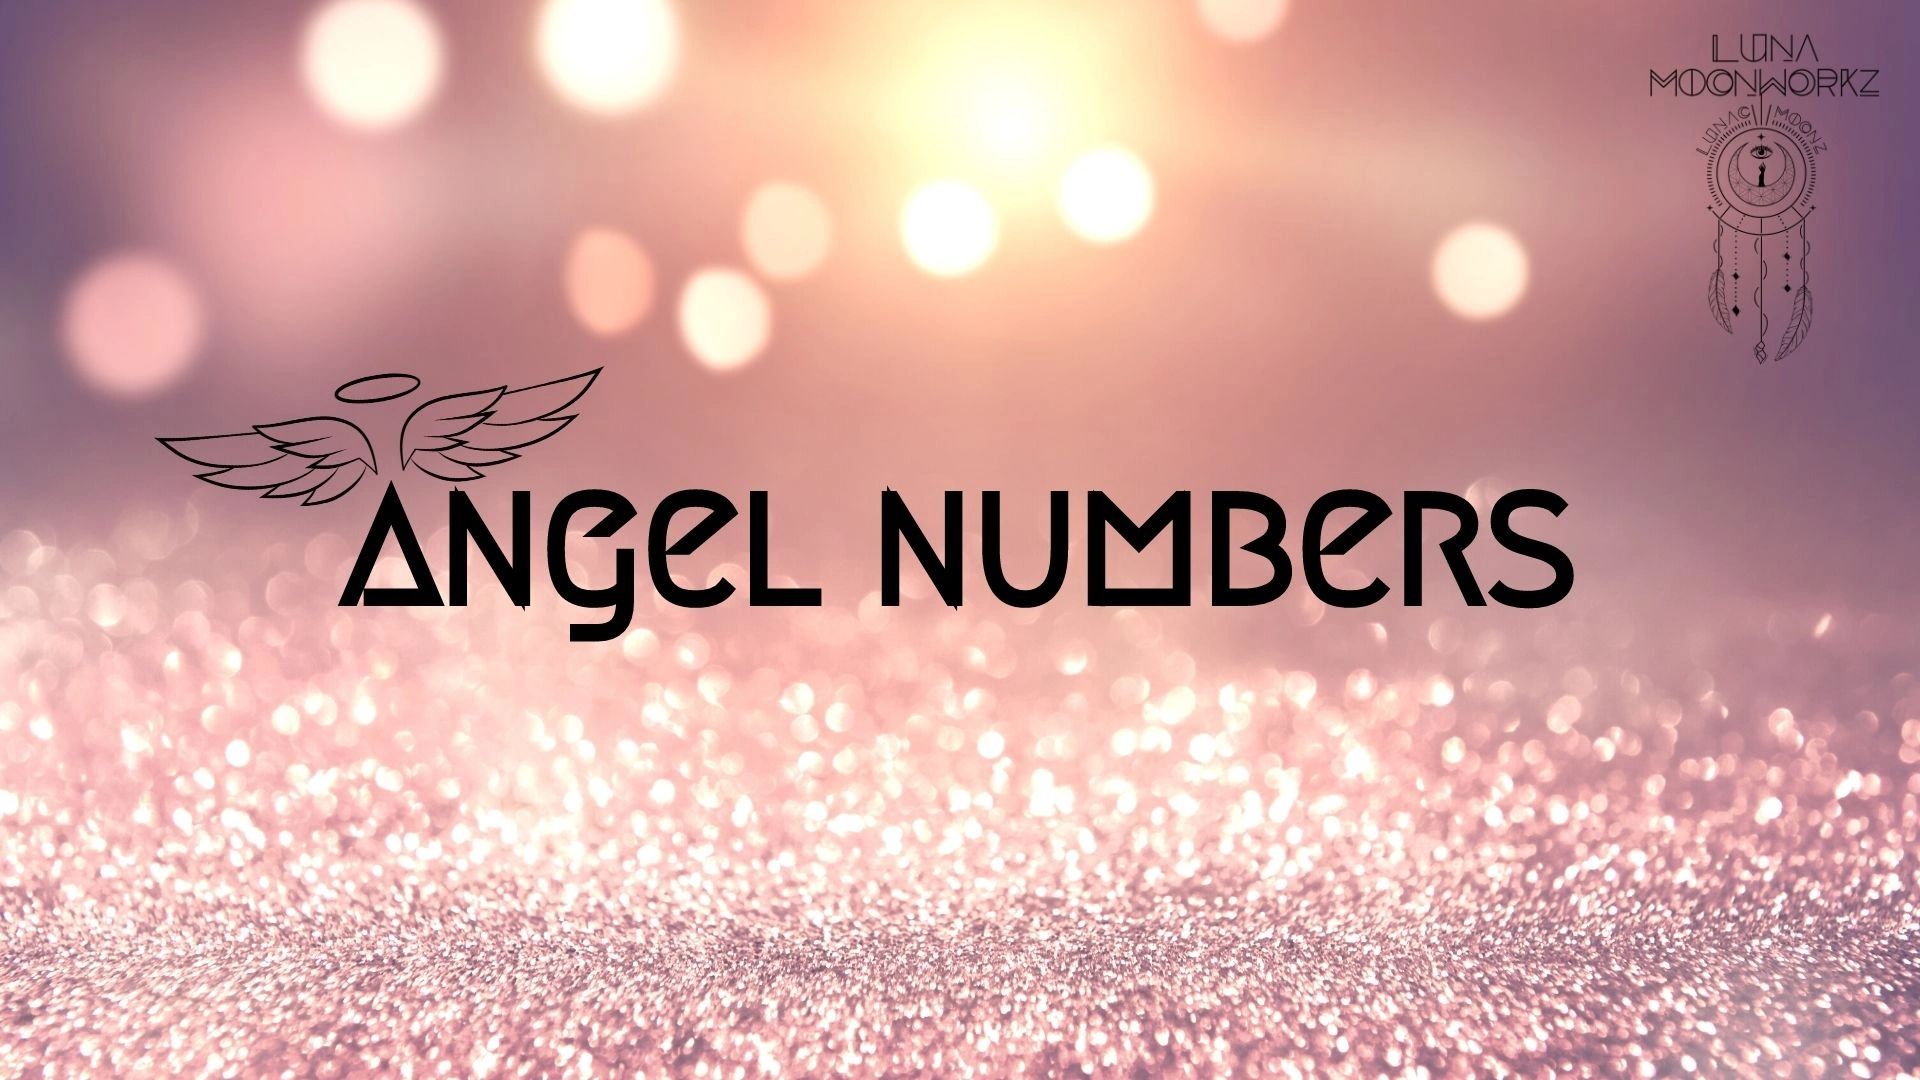 555 Angel Number Meaning in Numerology - Parade